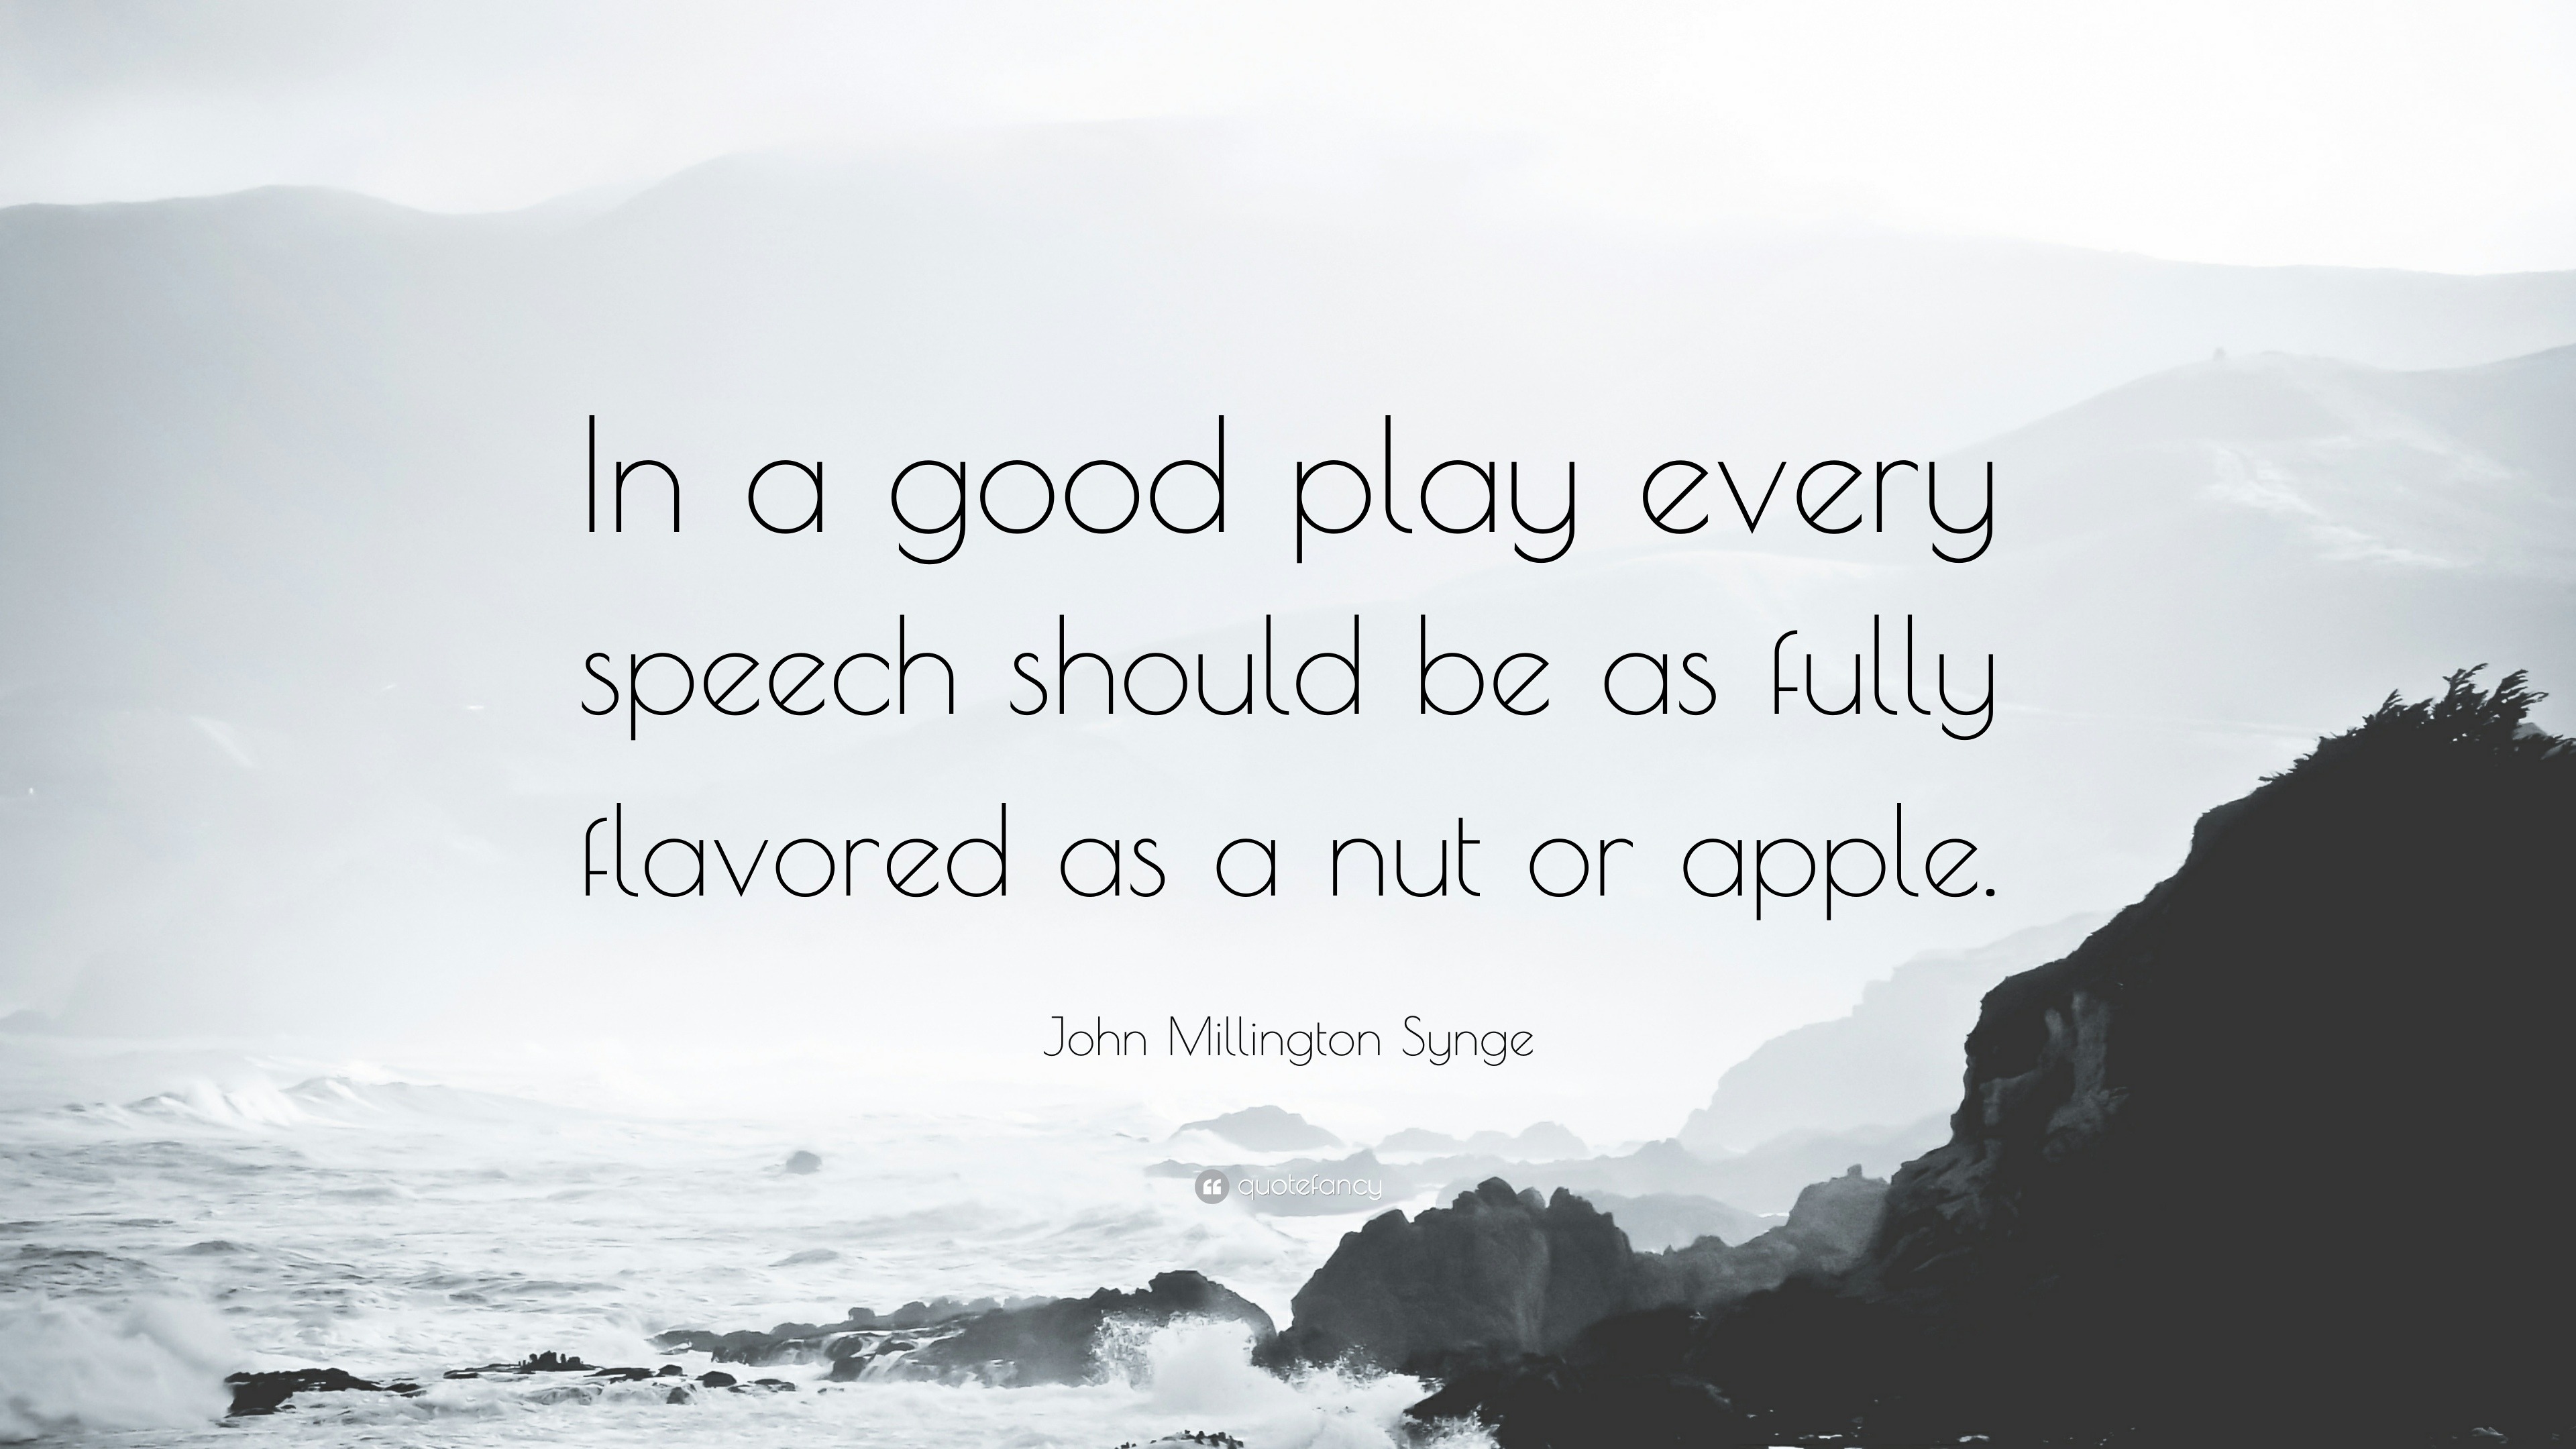 John Millington Synge Quote “in A Good Play Every Speech Should Be As Fully Flavored As A Nut 9335